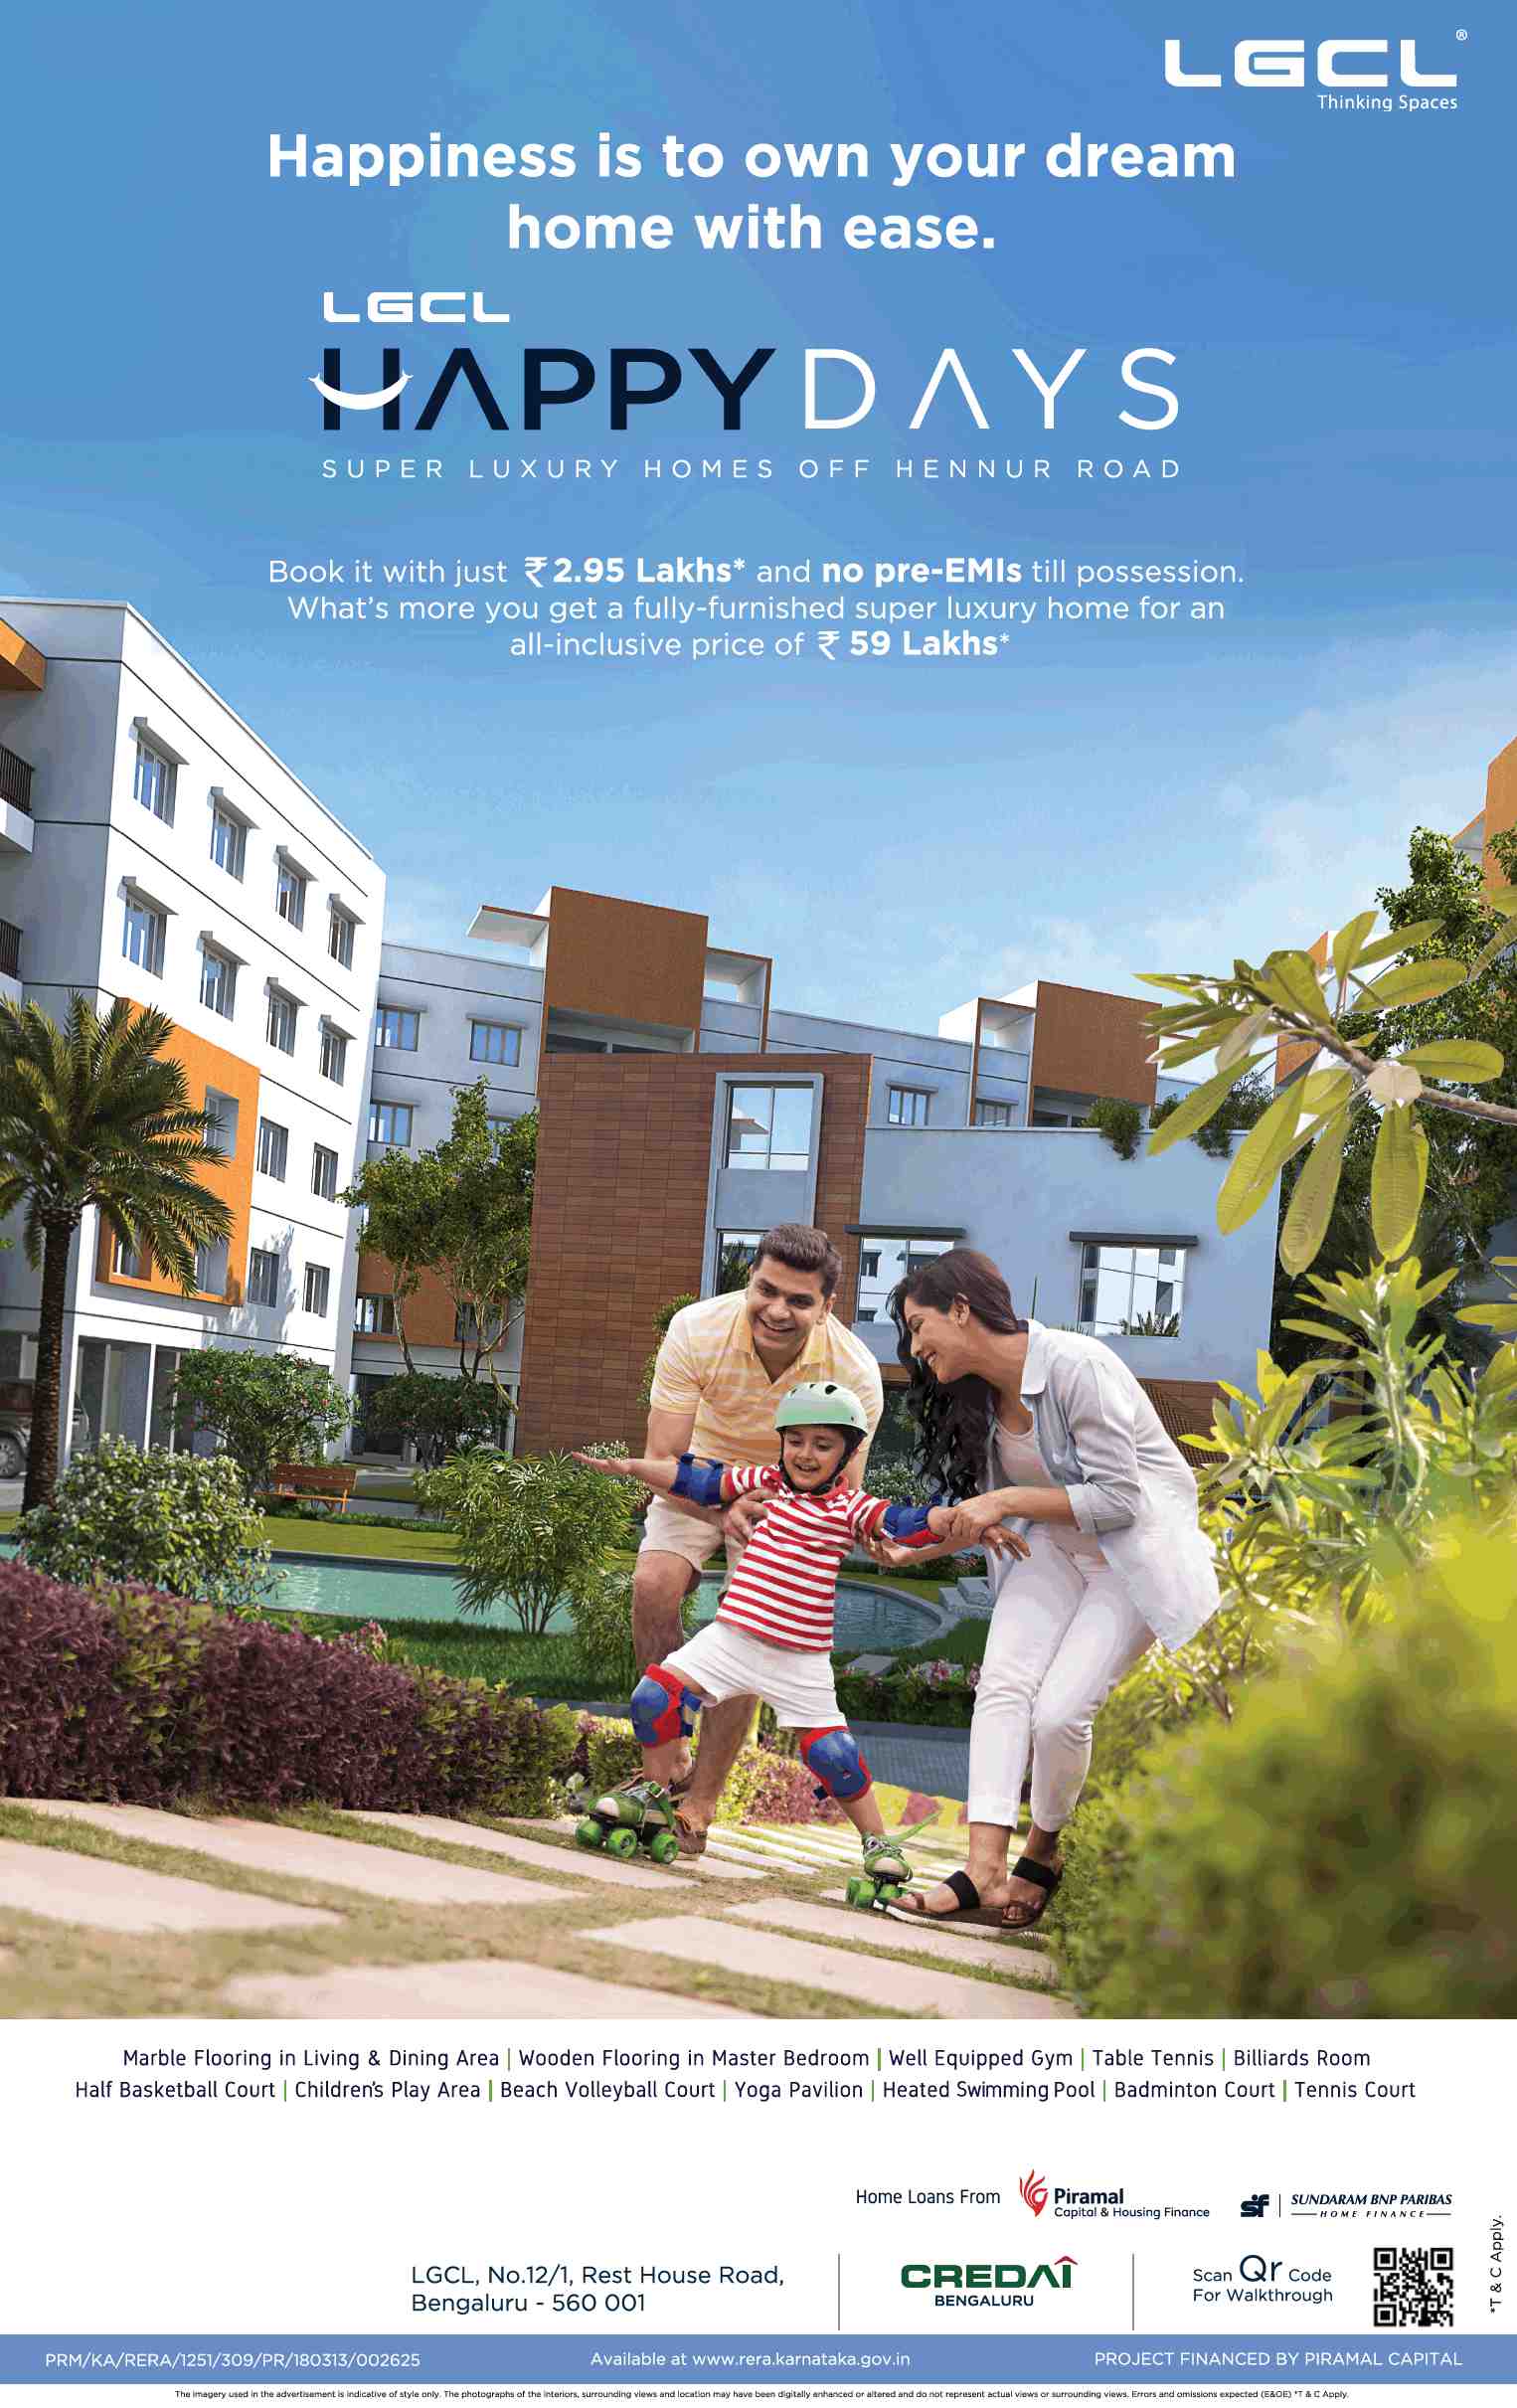 Get a fully furnished super luxury home @ Rs 59 Lakhs at LGCL Happy Days in Visthar, Bangalore Update